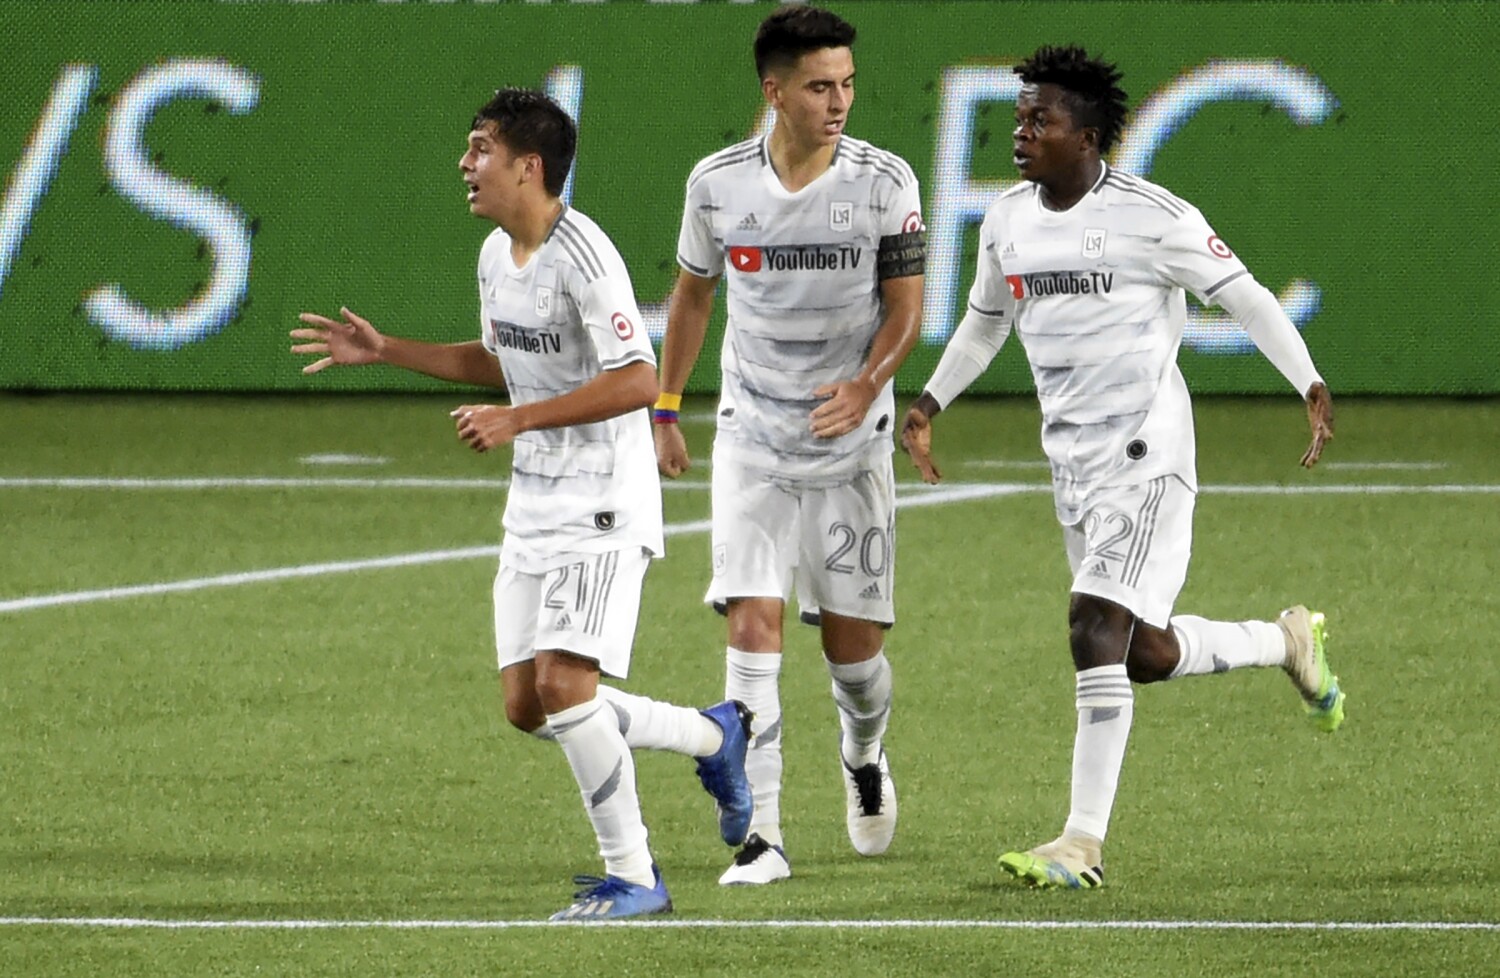 At 16, Christian Torres is eager to prove himself for LAFC in playoffs